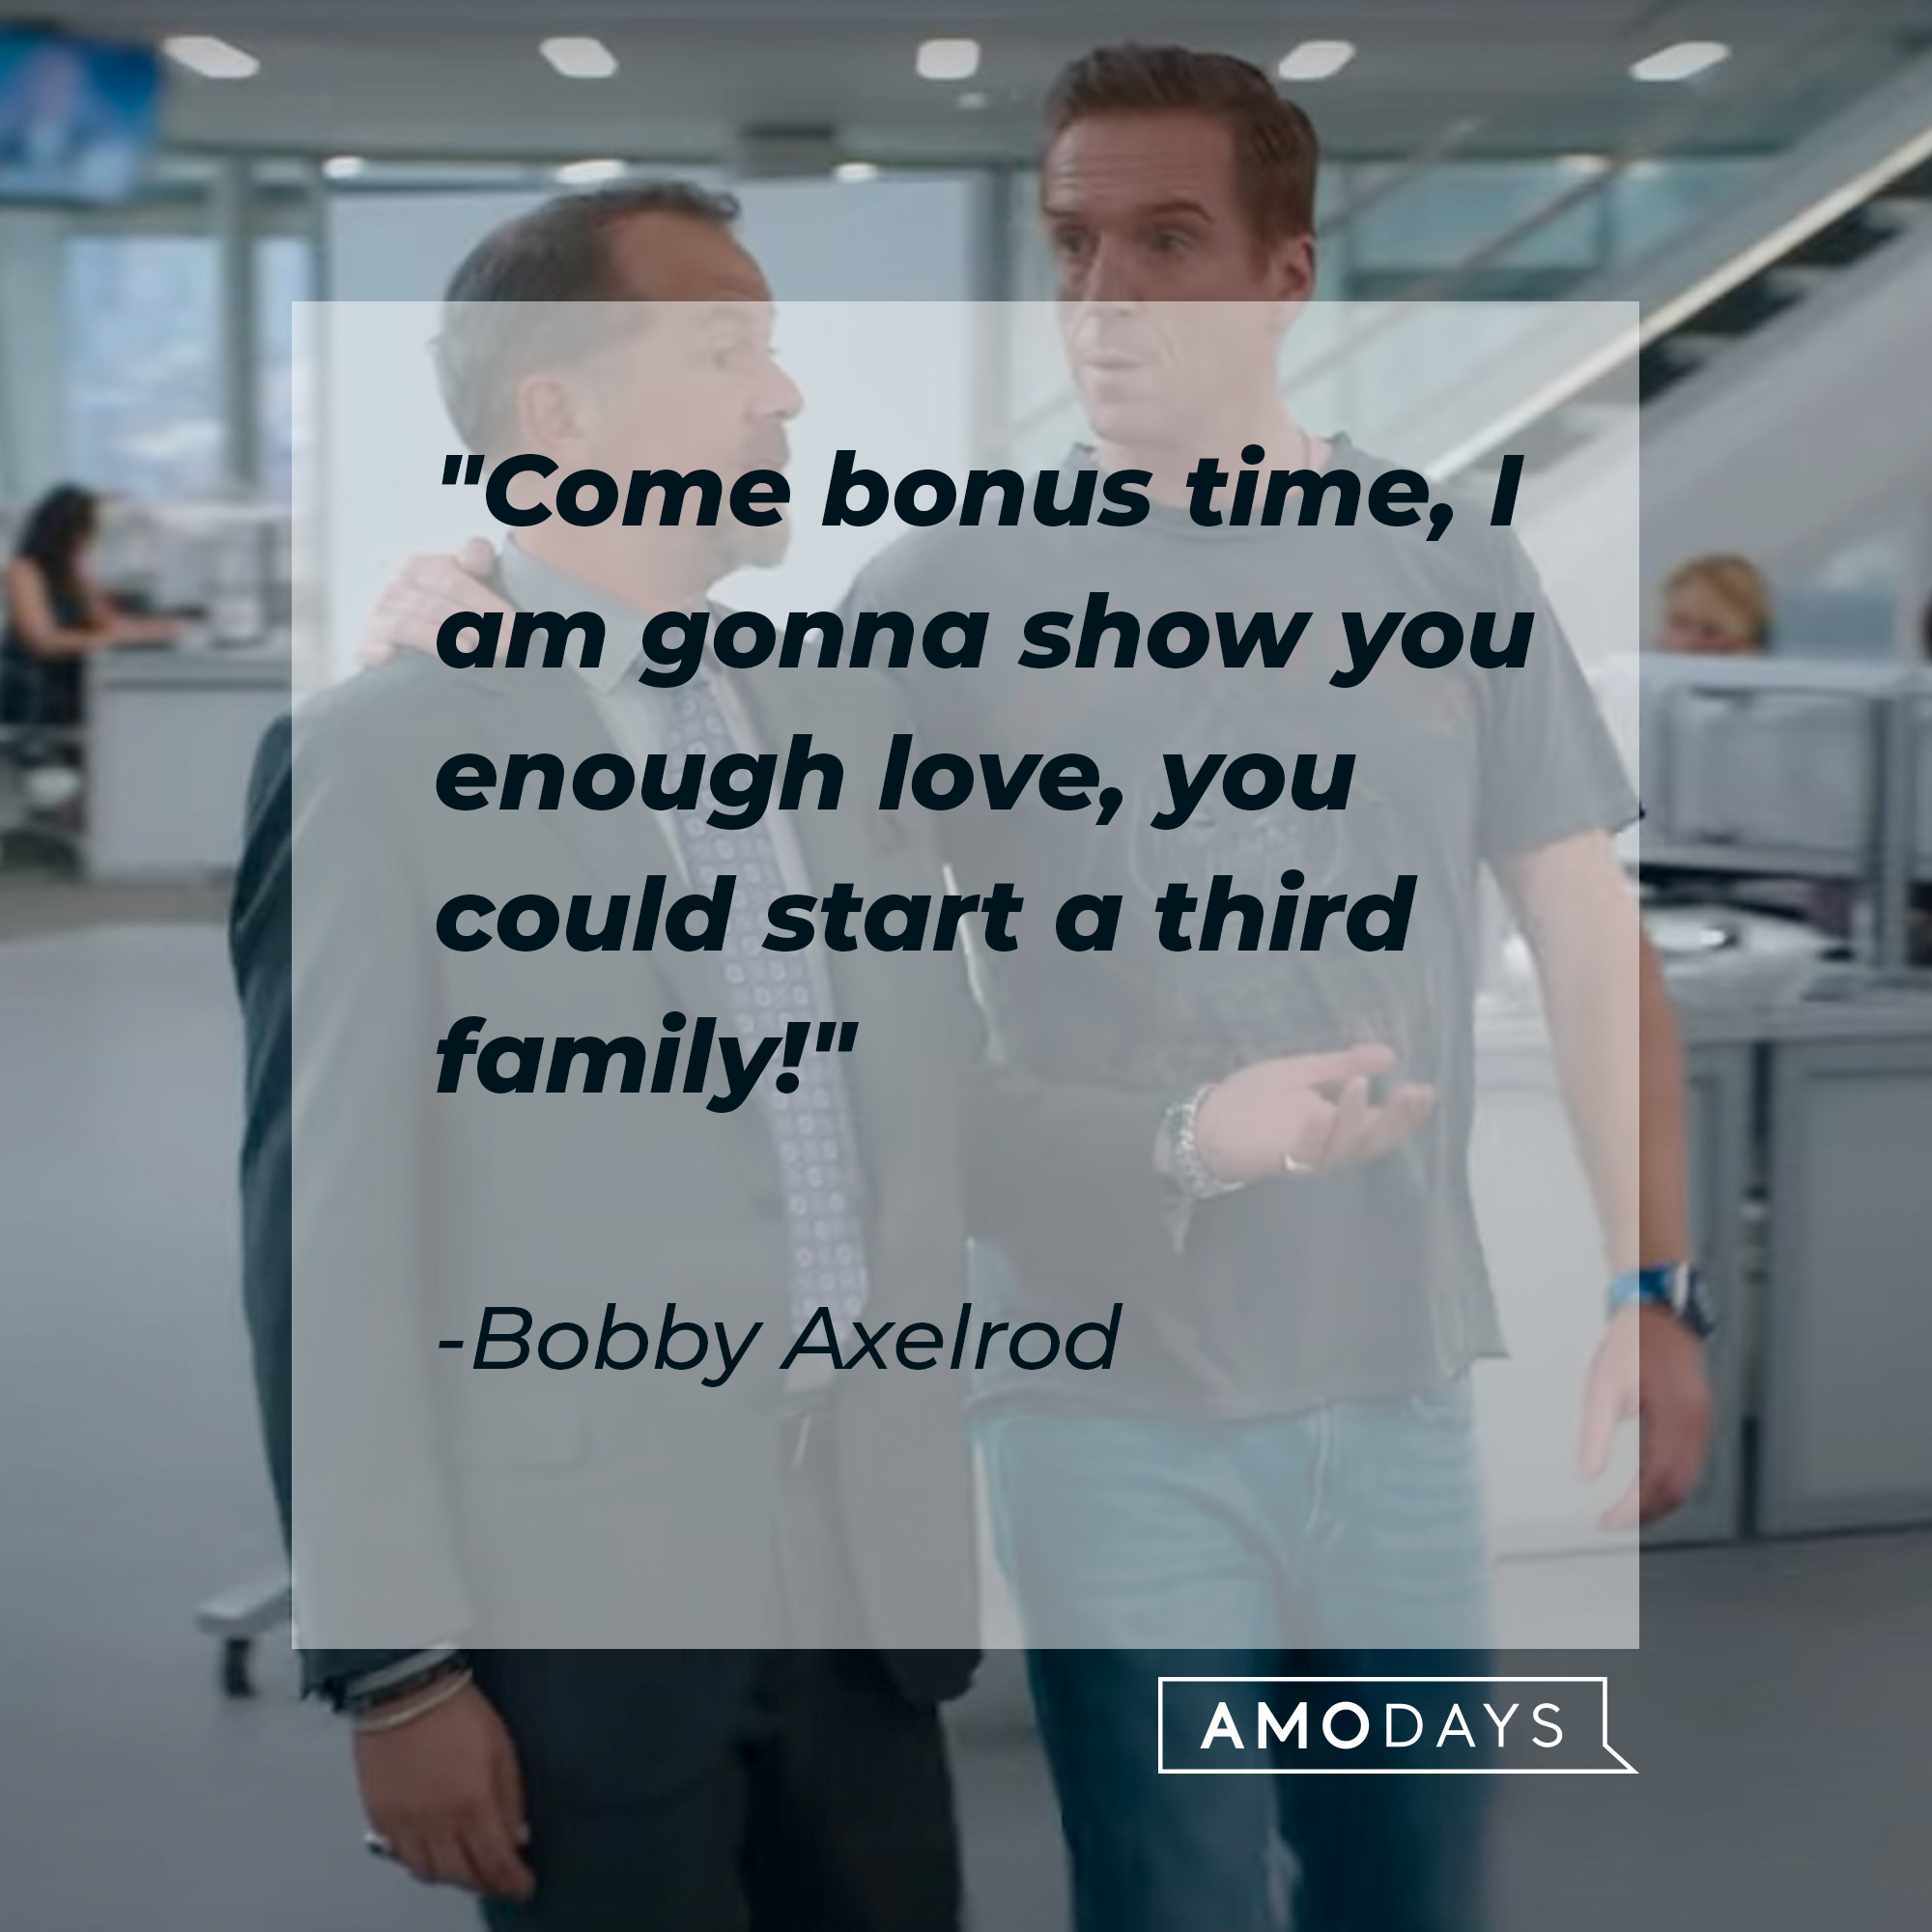 Bobby Axelrod's quote: "Come bonus time, I am gonna show you enough love, you could start a third family!" | Source: Youtube.com/BillionsOnShowtime